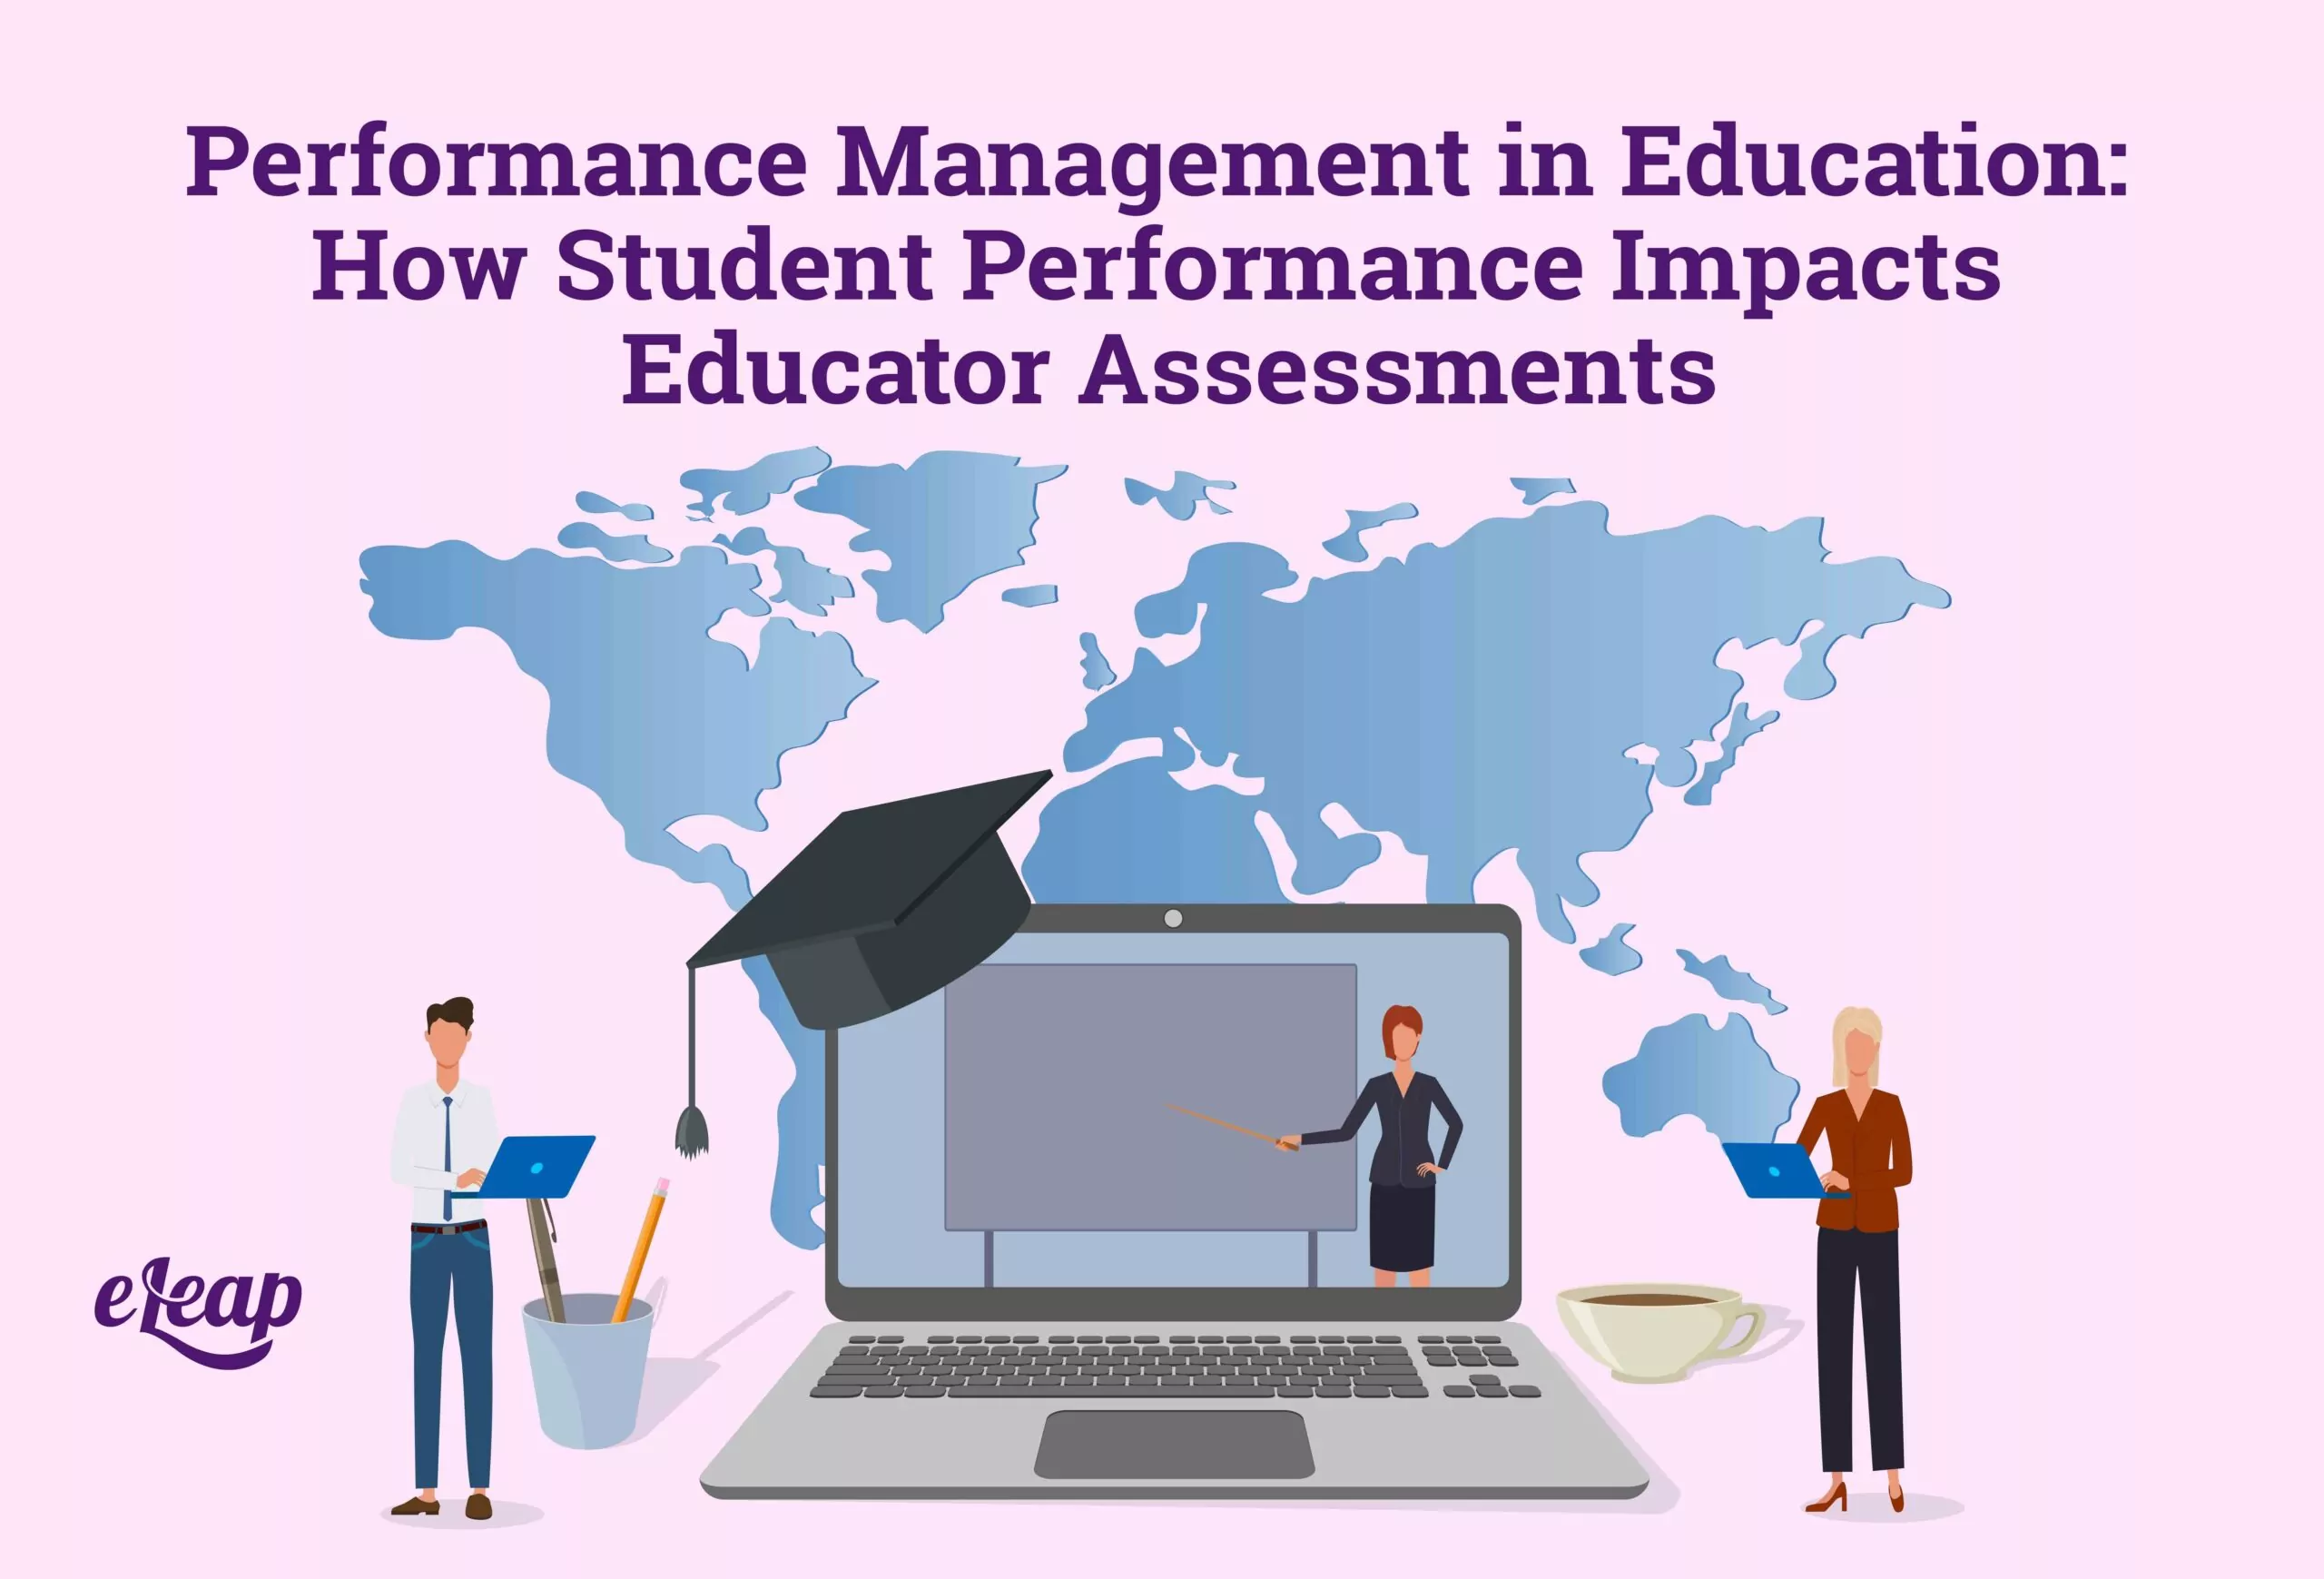 Performance Management in Education: How Student Performance Impacts Educator Assessments